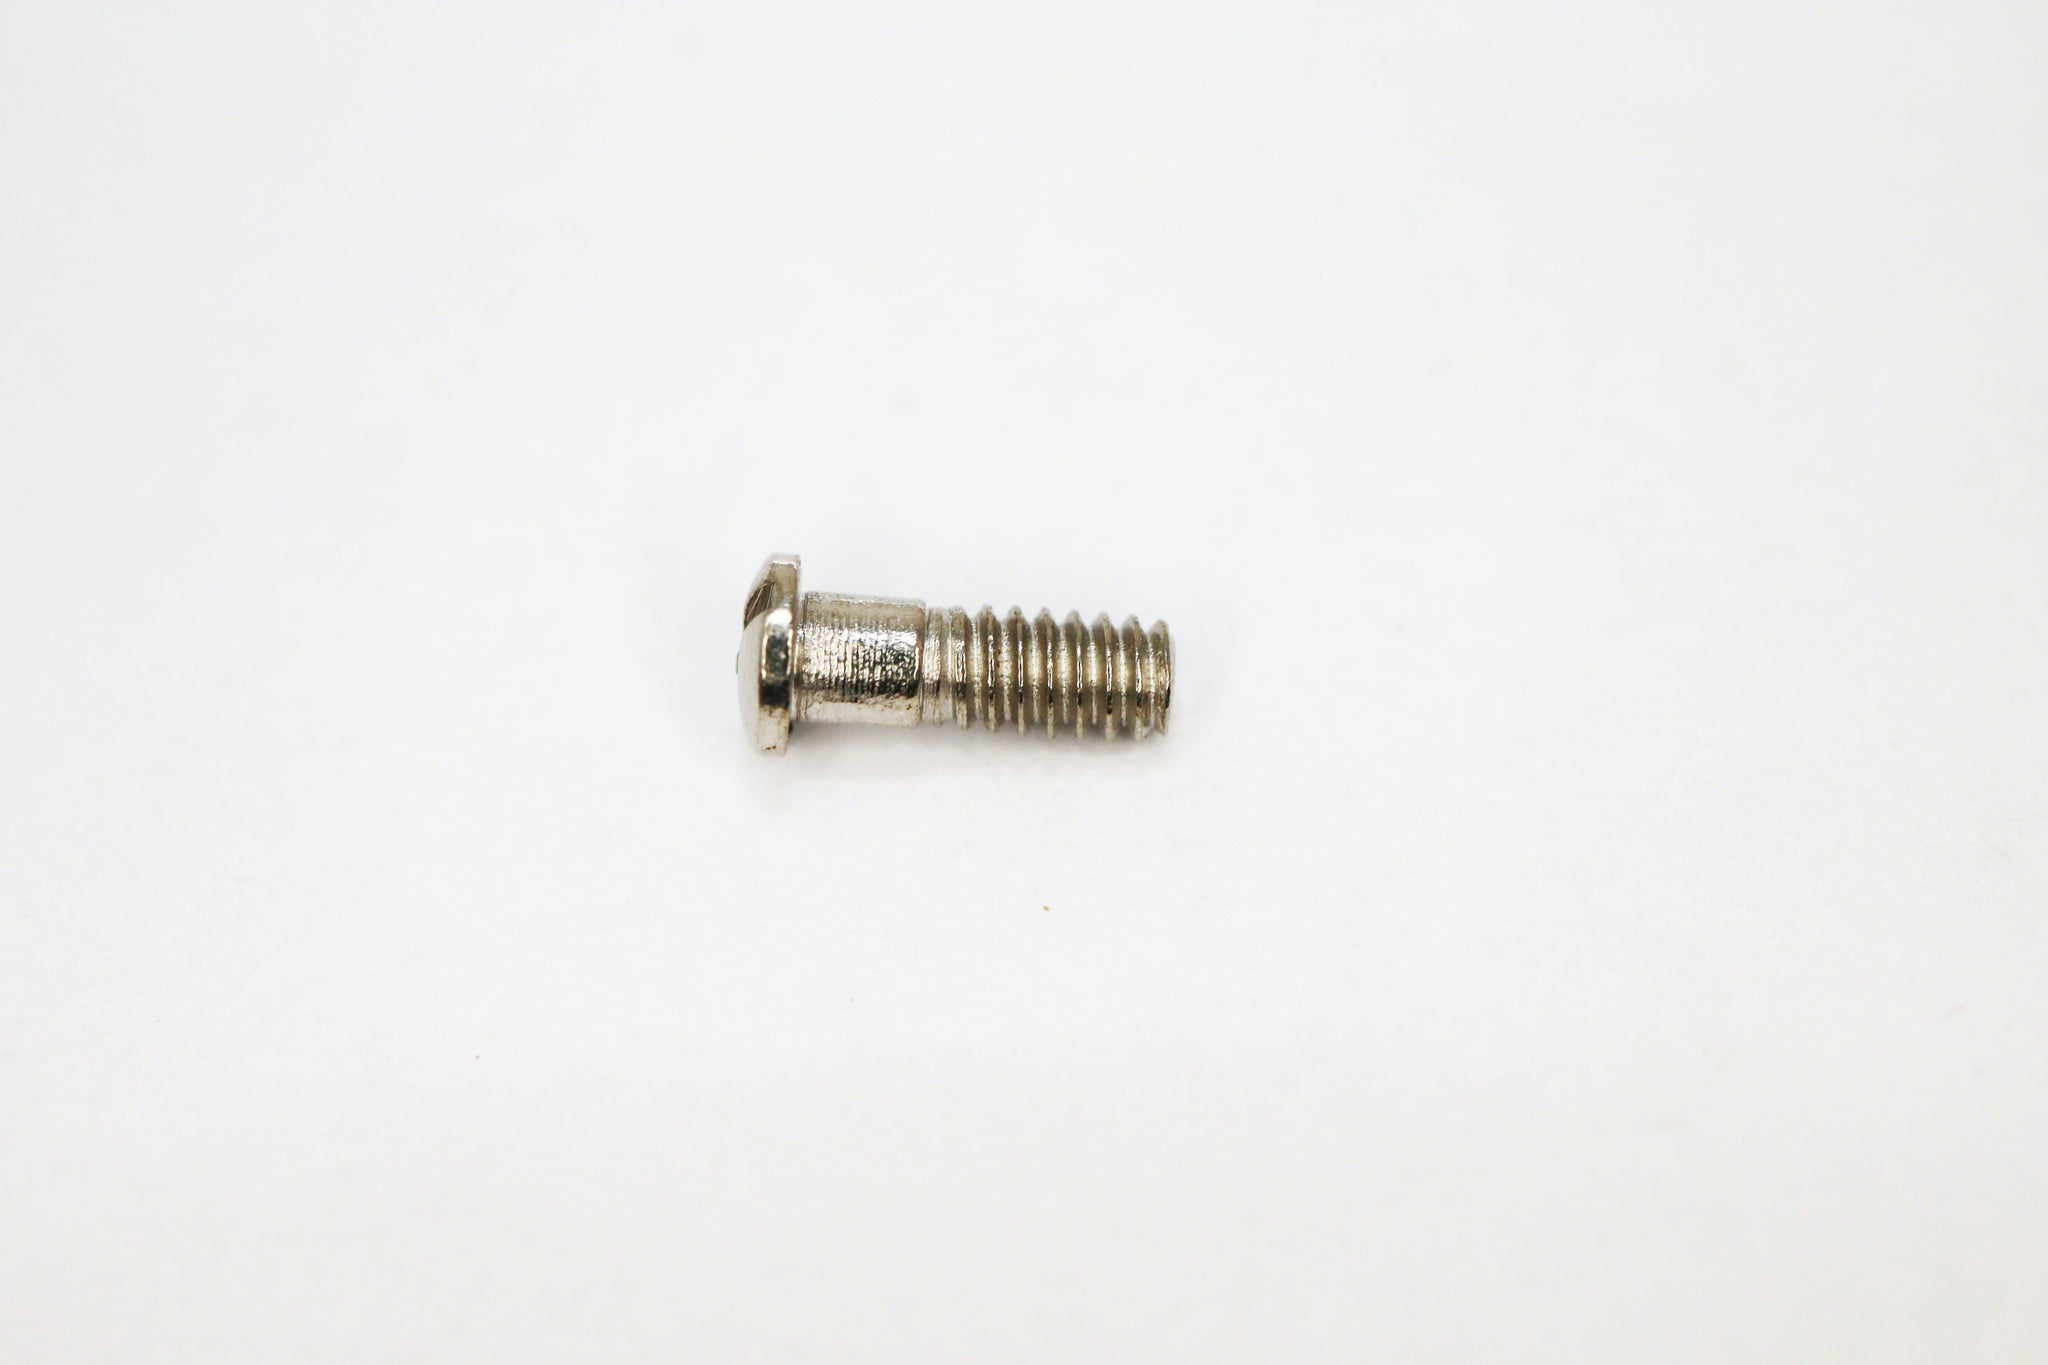 Tory Burch TY7106 Screws | Replacement Screws For TY 7106 